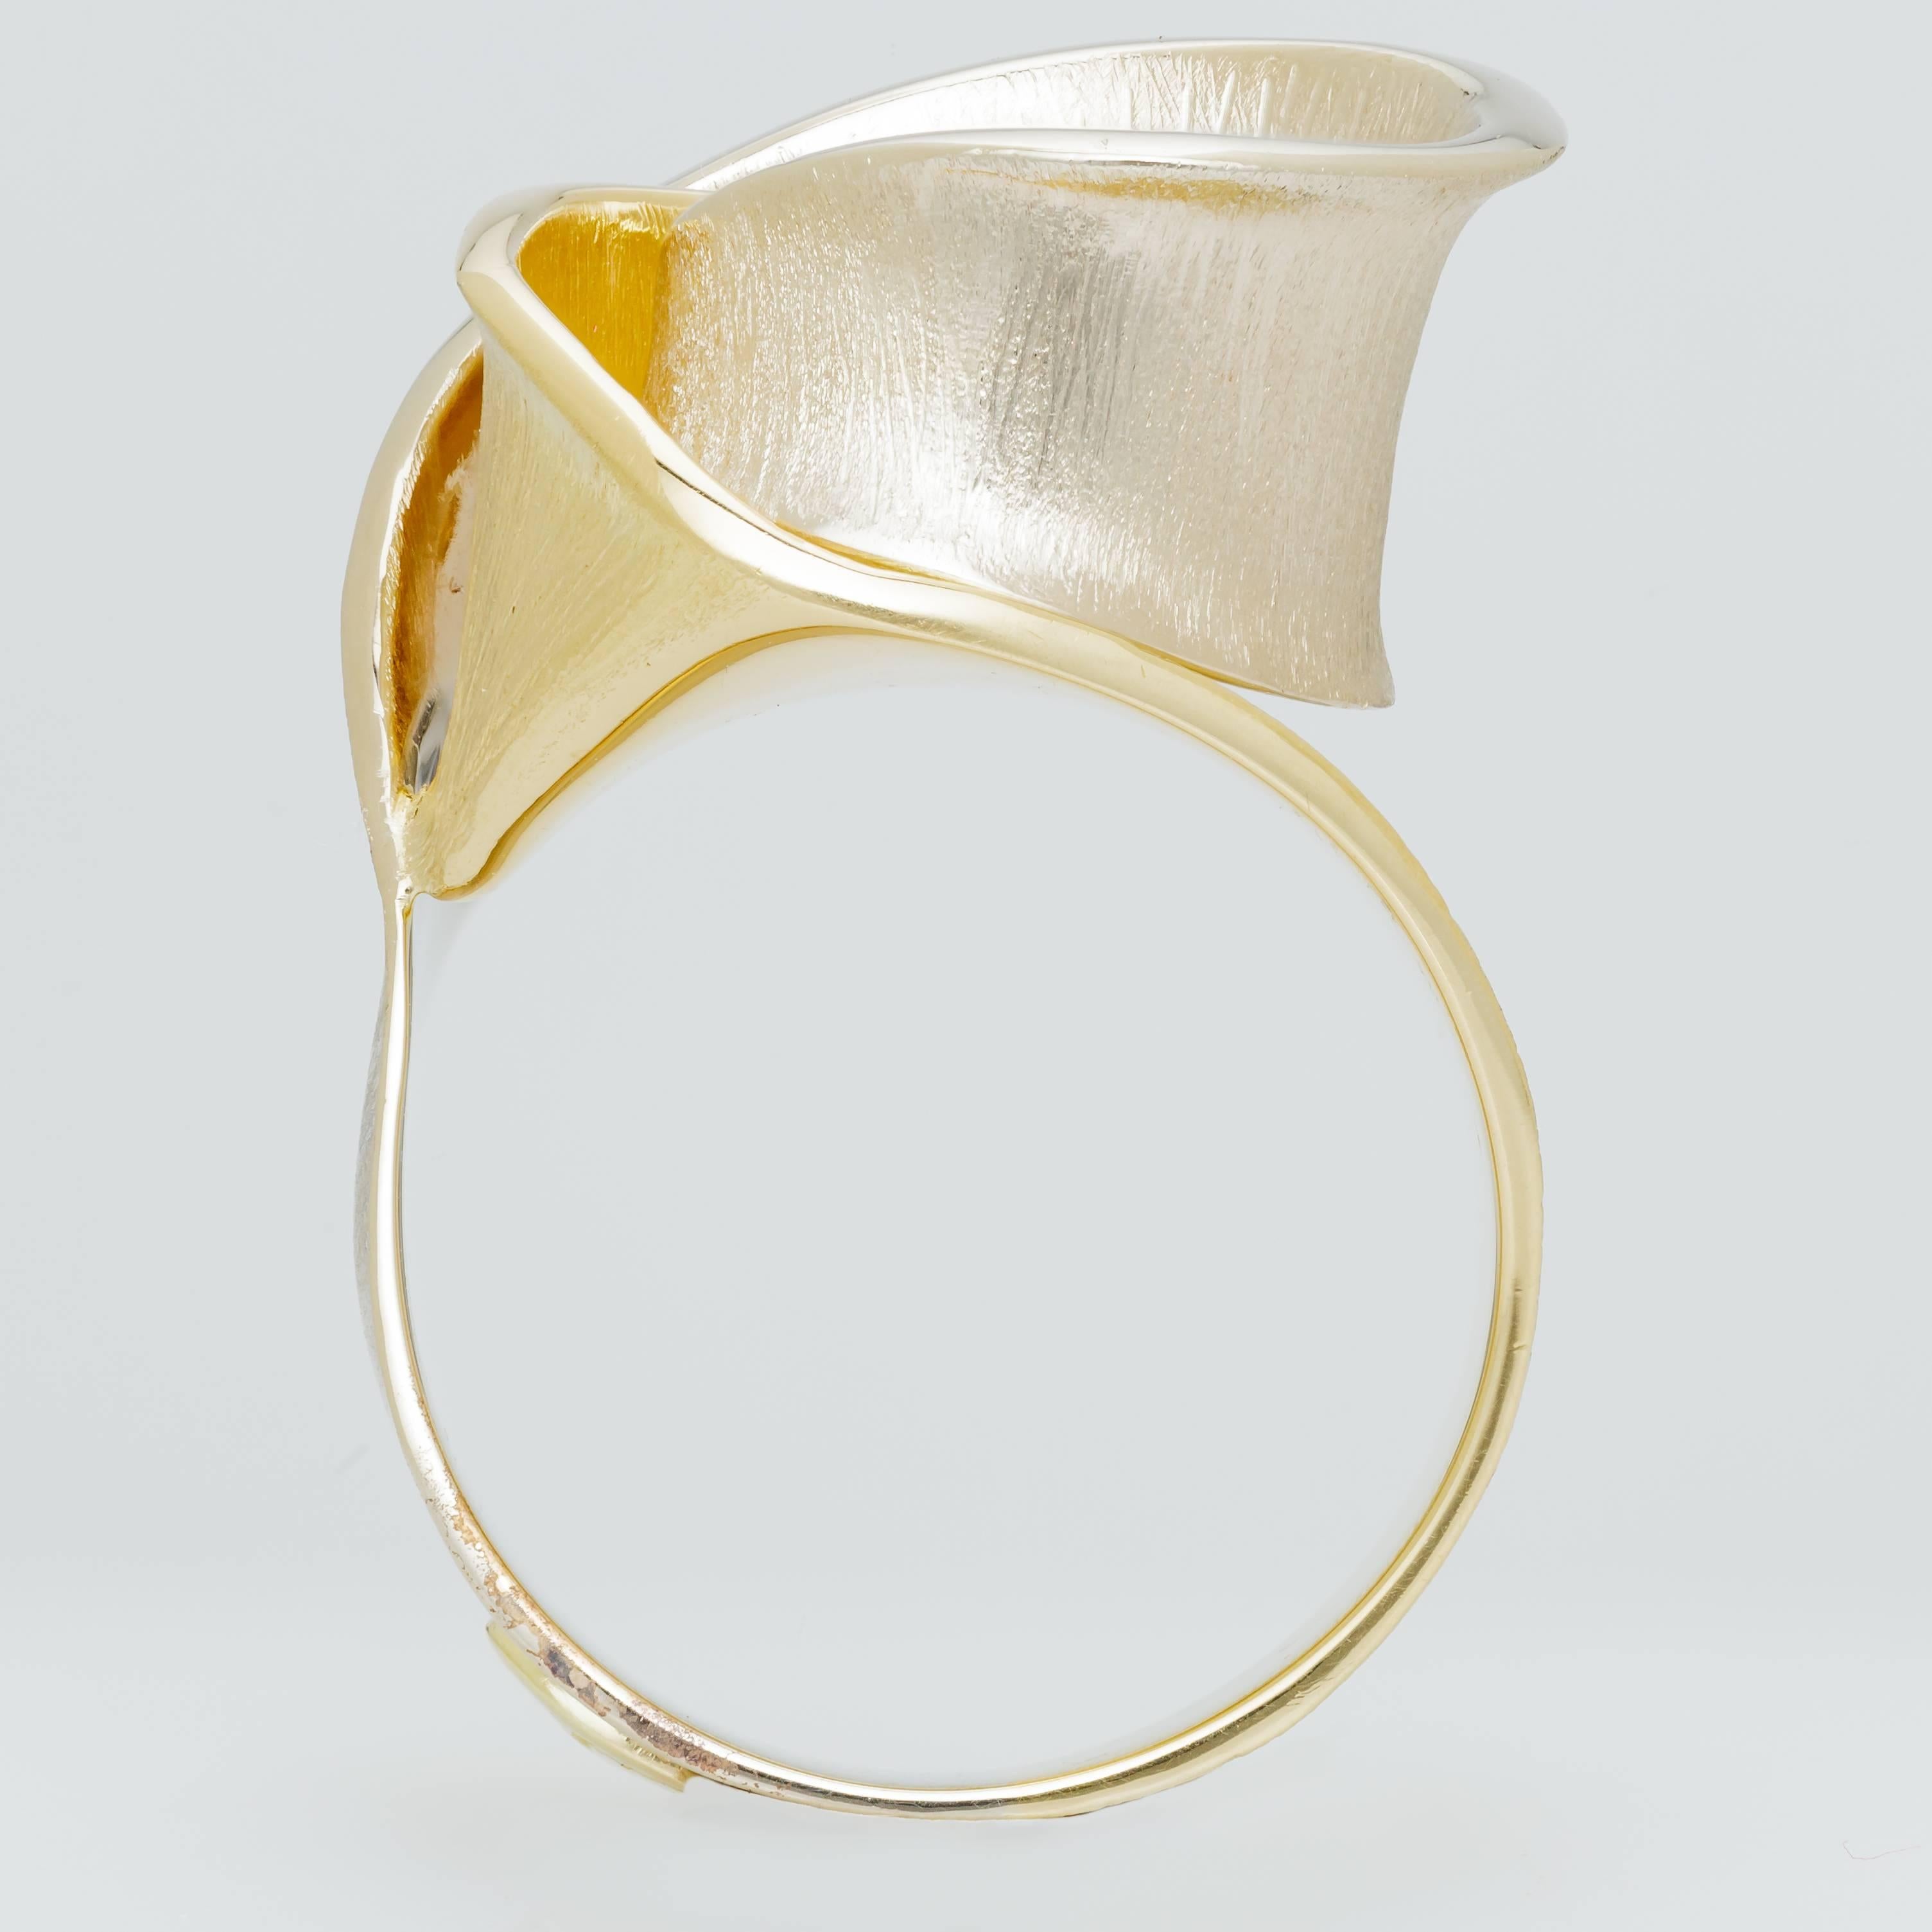 This new H. Stern ring features a fluid rose design, half in 18k yellow gold, half in 18k rose gold.  The ring fits a size 7.  Has minor marks from storage.